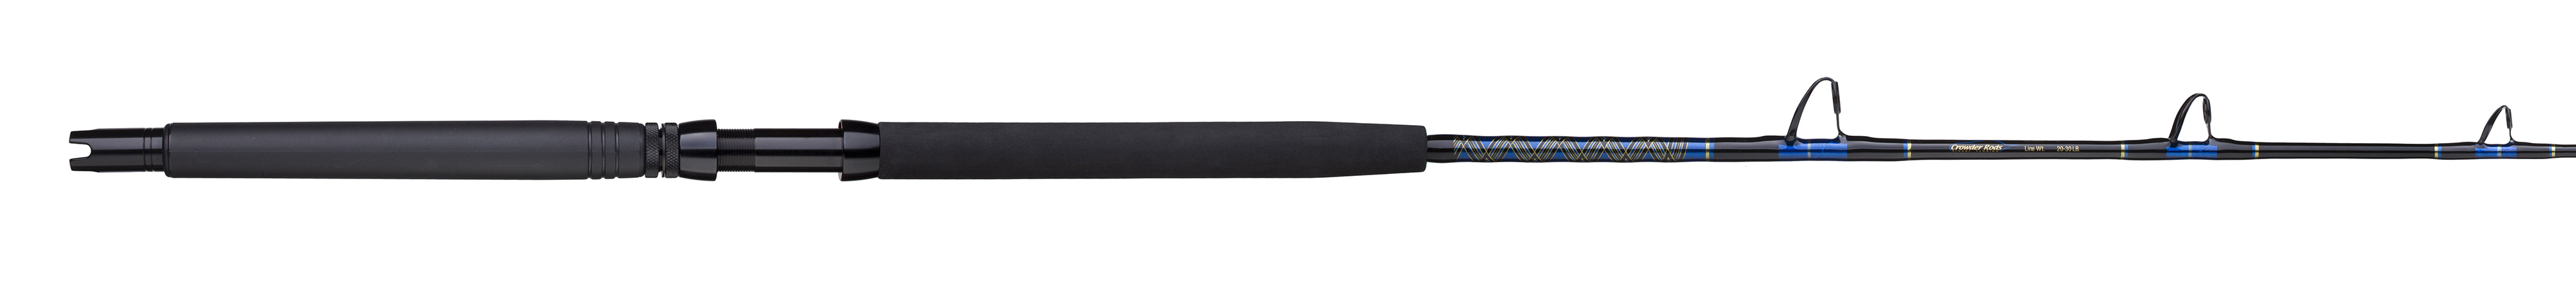 Crowder Su3060 Stand-Up Rod, 20-30lb, with Fuji Guides